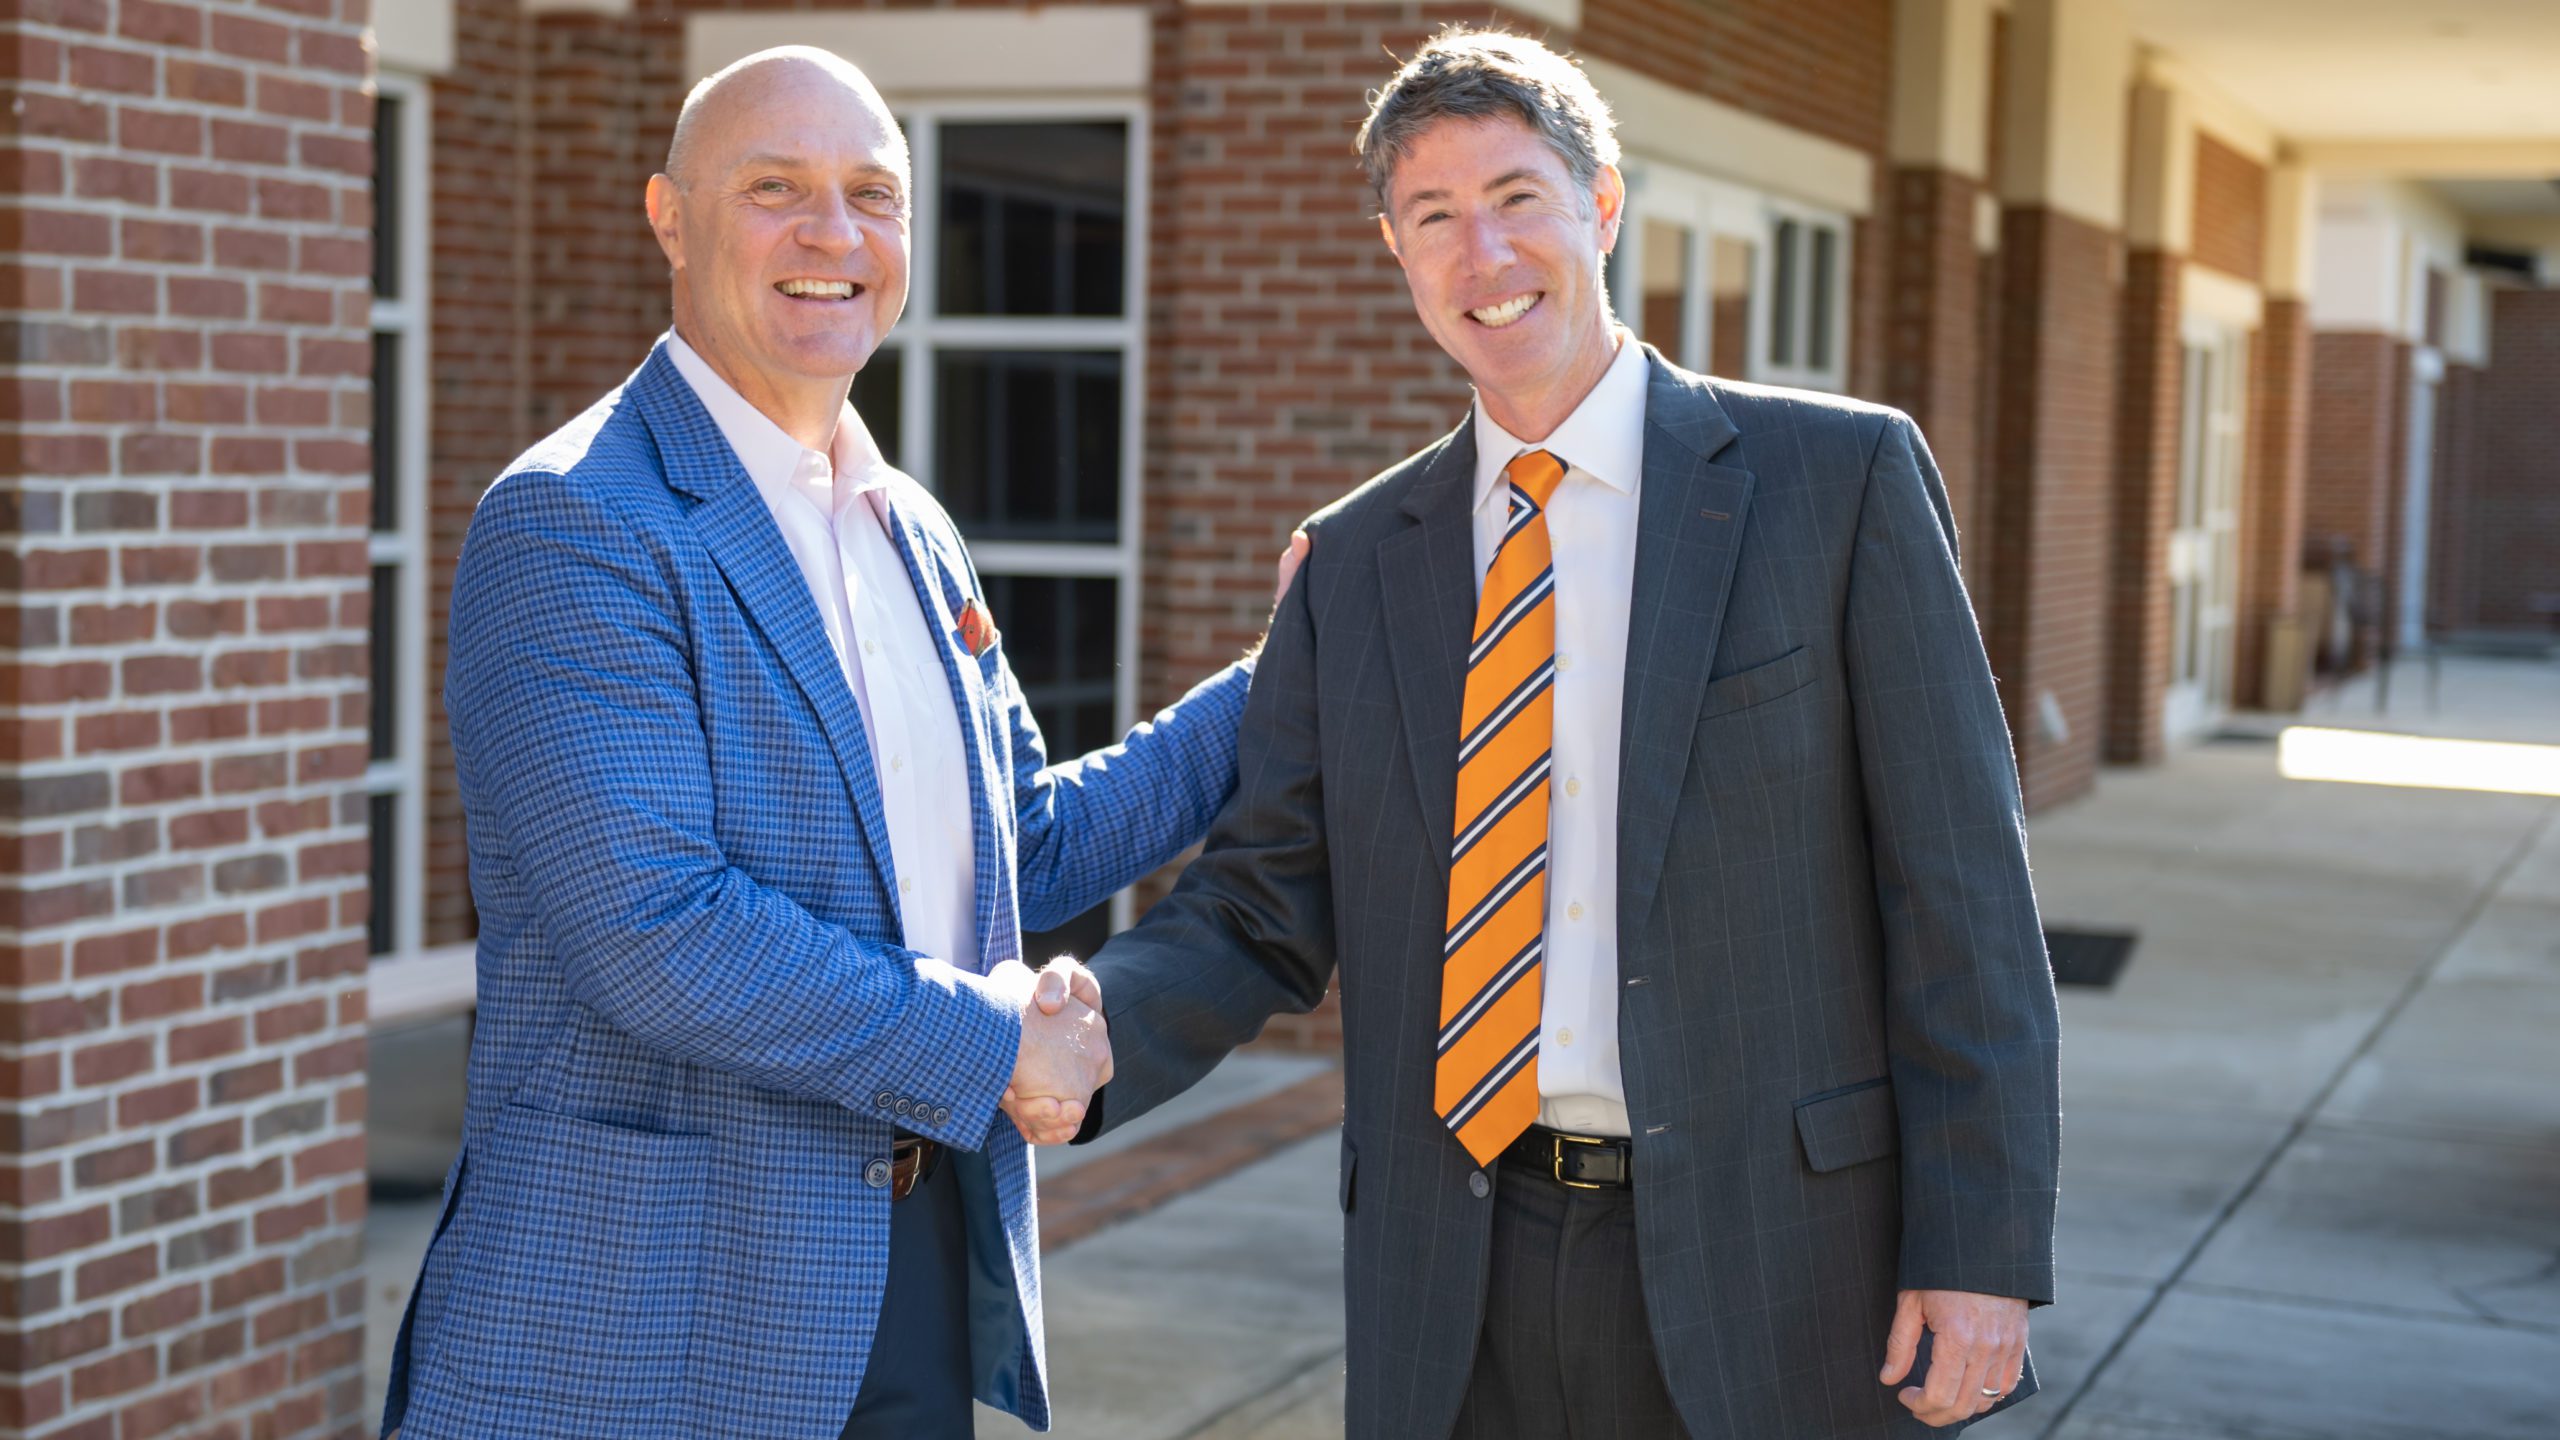 Jim Clements and Robert Halfacre share a handshake outside of the Madren Conference Center in April 2022